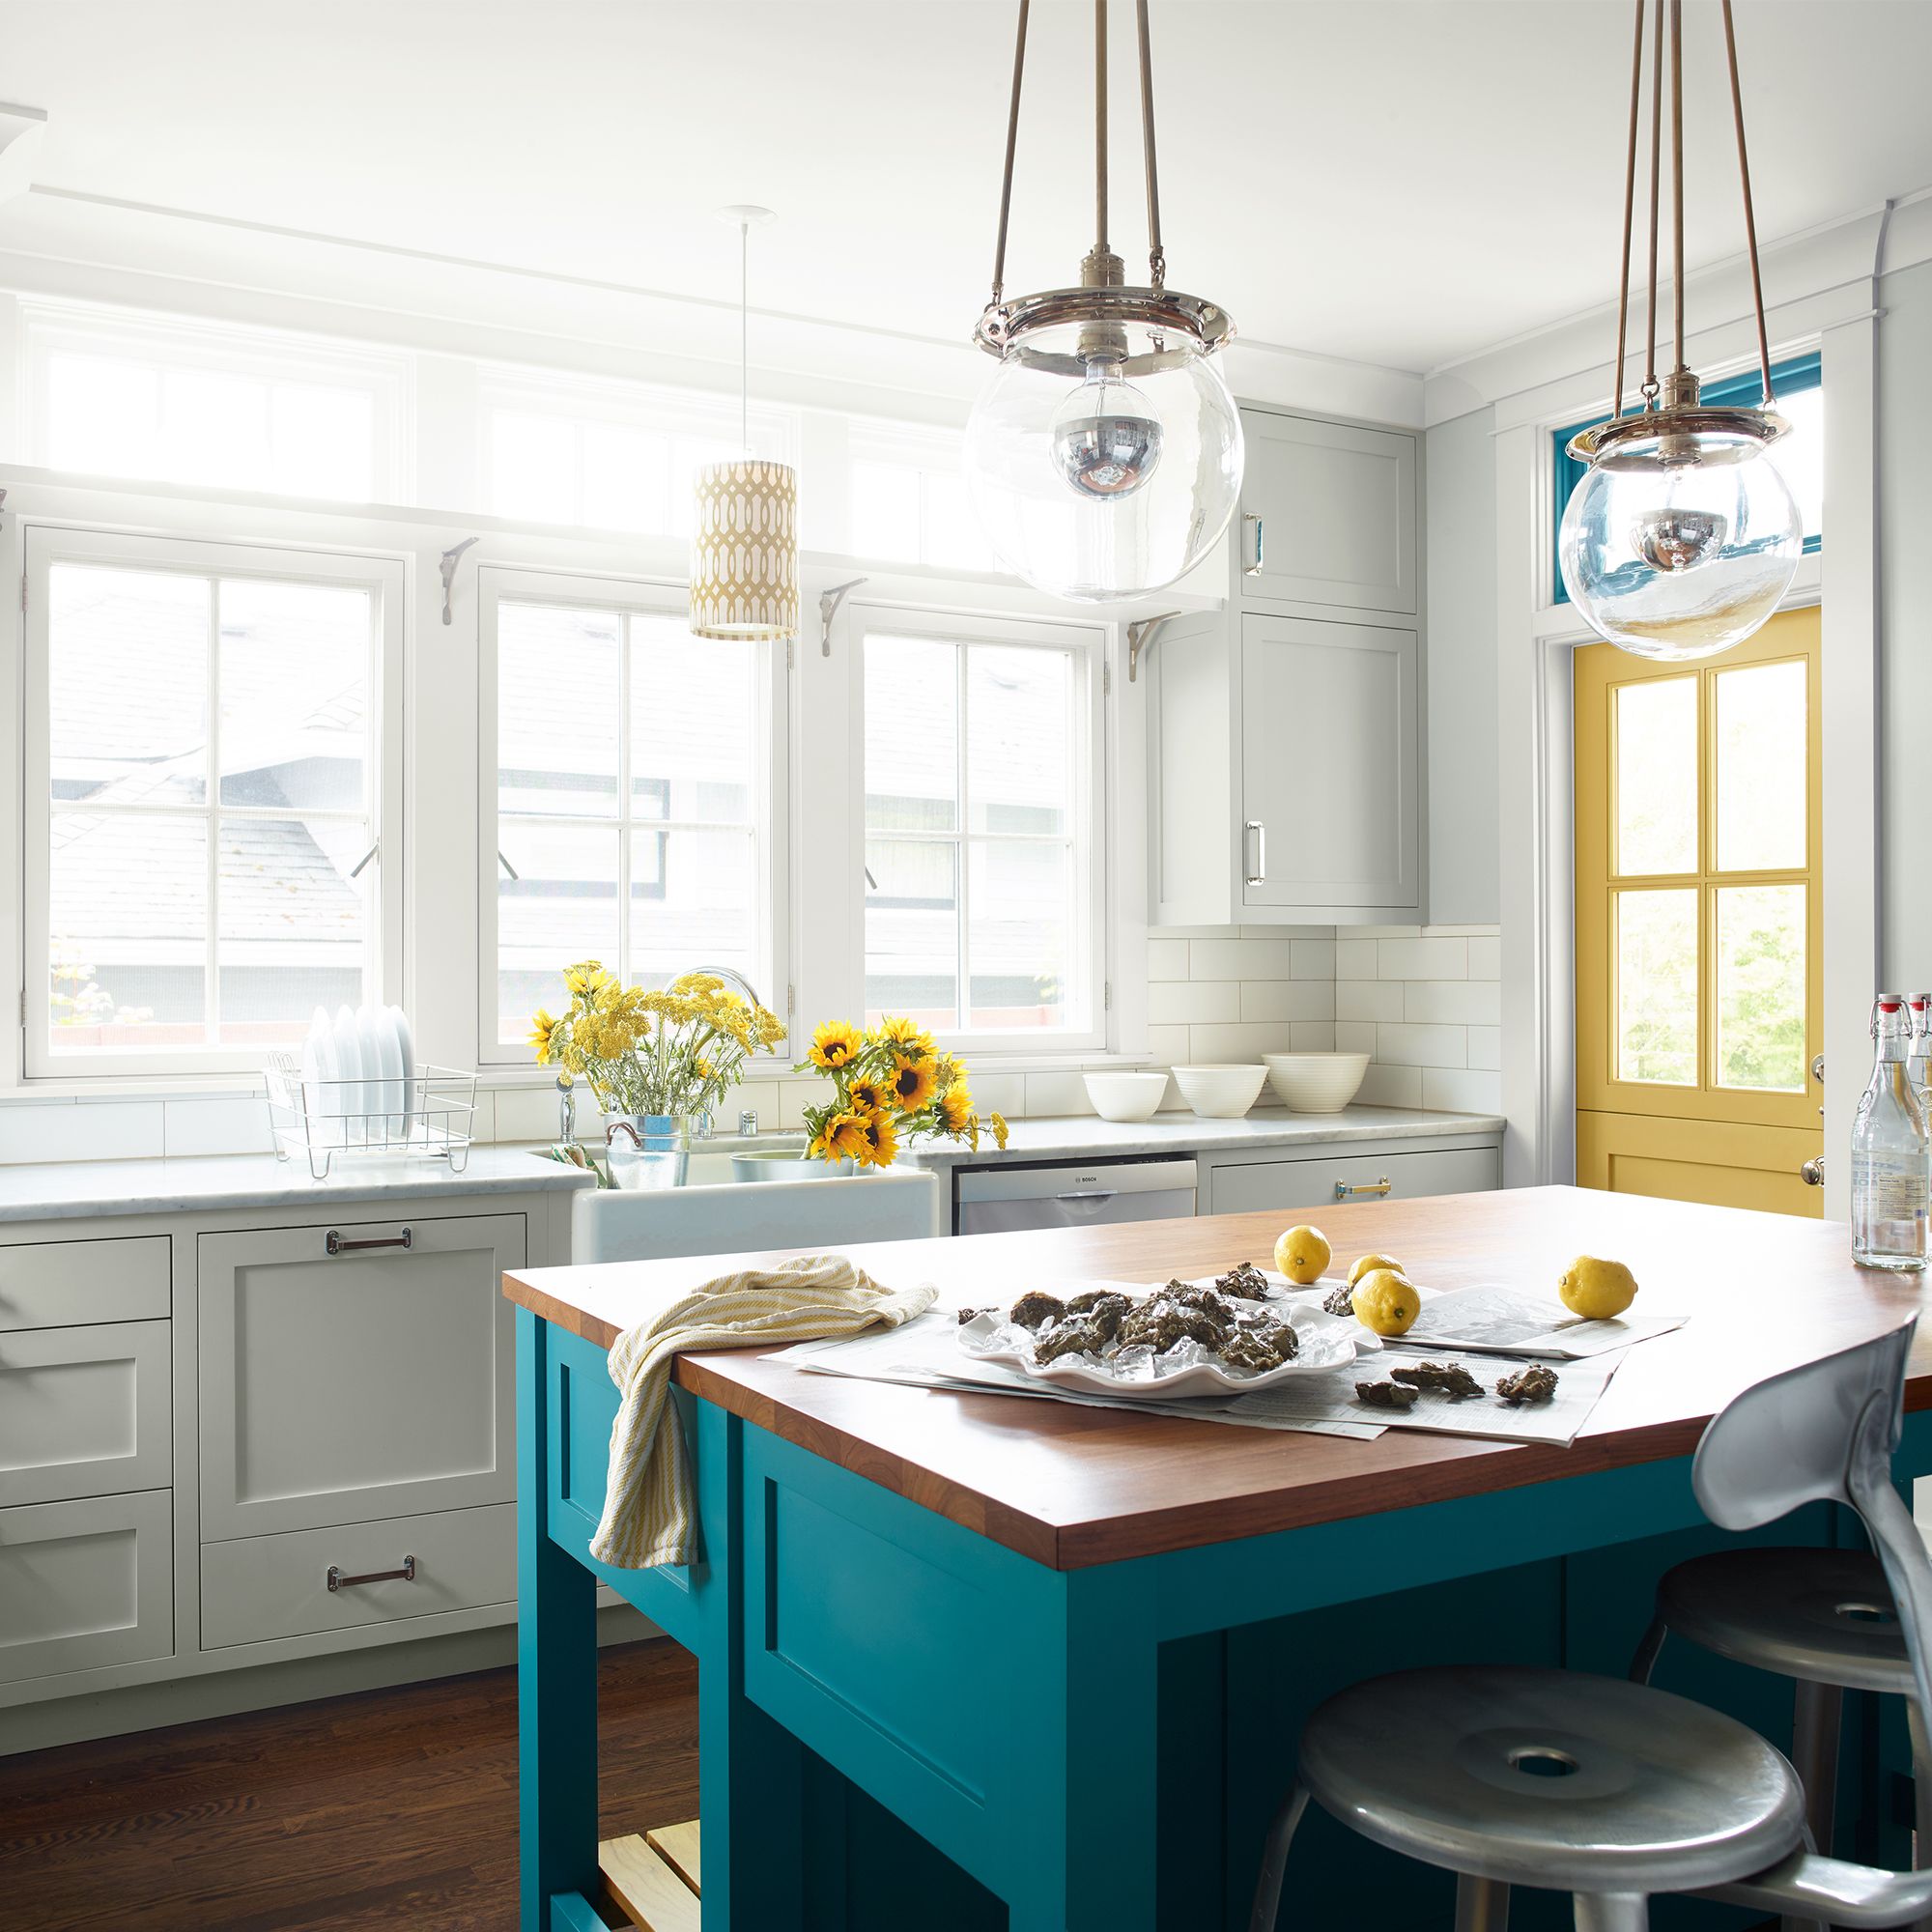 Benjamin Moore Owl Gray OC-52 cabinetry with blue-green and yellow accents.
  